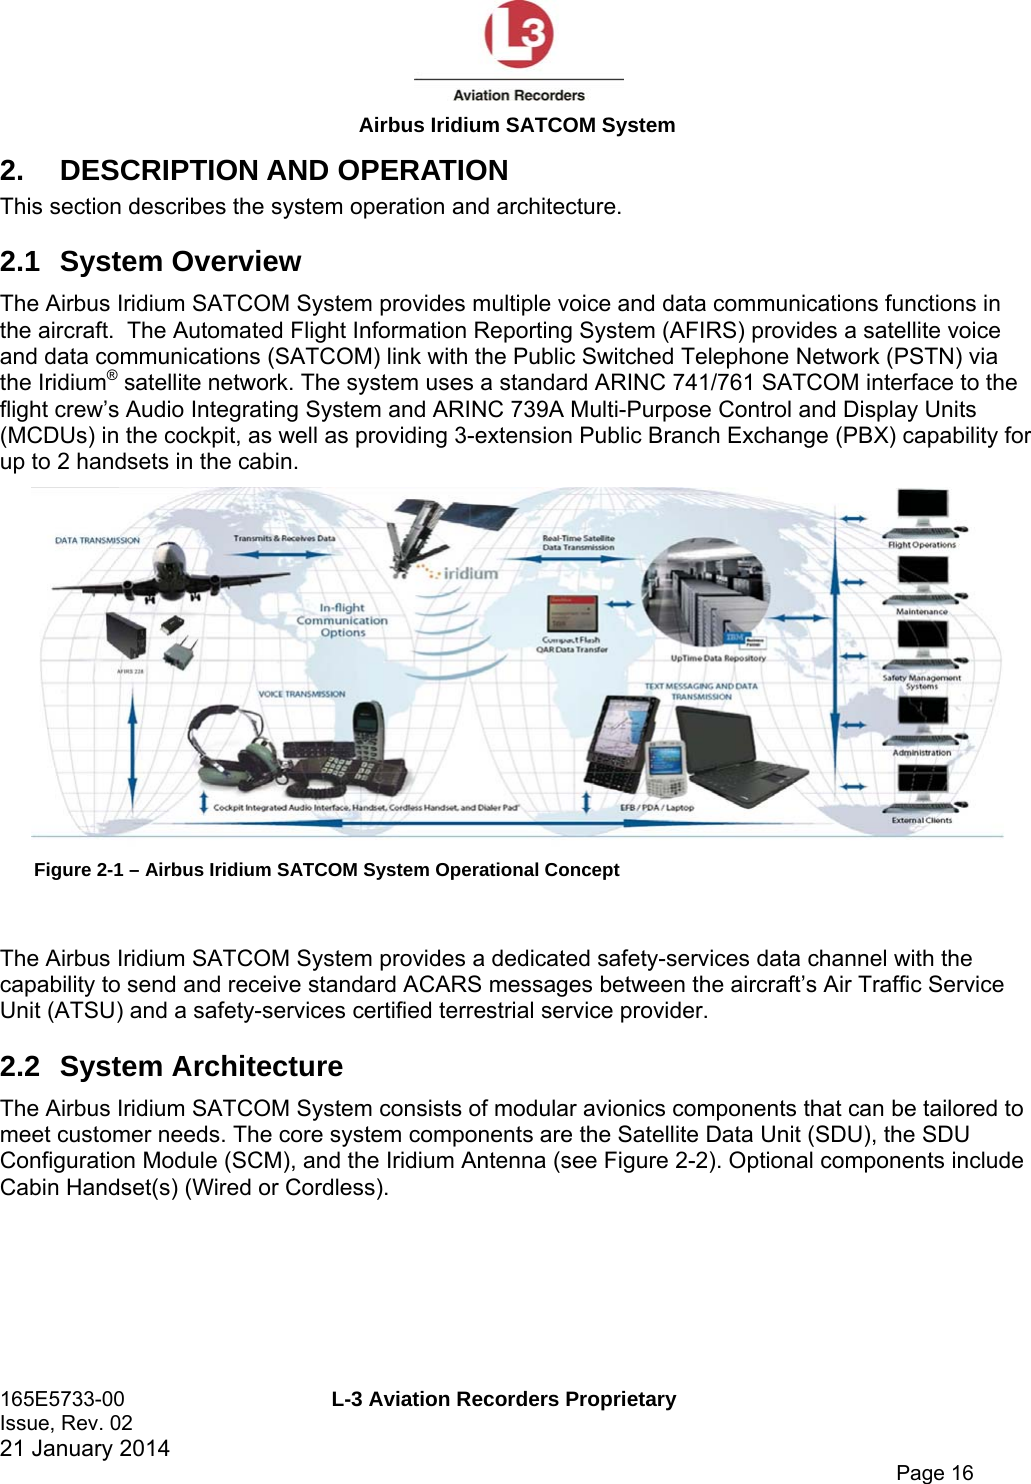  Airbus Iridium SATCOM System 165E5733-00  L-3 Aviation Recorders Proprietary Issue, Rev. 02   21 January 2014      Page 16 2. DESCRIPTION AND OPERATION This section describes the system operation and architecture. 2.1 System Overview The Airbus Iridium SATCOM System provides multiple voice and data communications functions in the aircraft.  The Automated Flight Information Reporting System (AFIRS) provides a satellite voice and data communications (SATCOM) link with the Public Switched Telephone Network (PSTN) via the Iridium® satellite network. The system uses a standard ARINC 741/761 SATCOM interface to the flight crew’s Audio Integrating System and ARINC 739A Multi-Purpose Control and Display Units (MCDUs) in the cockpit, as well as providing 3-extension Public Branch Exchange (PBX) capability for up to 2 handsets in the cabin.   Figure 2-1 – Airbus Iridium SATCOM System Operational Concept  The Airbus Iridium SATCOM System provides a dedicated safety-services data channel with the capability to send and receive standard ACARS messages between the aircraft’s Air Traffic Service Unit (ATSU) and a safety-services certified terrestrial service provider. 2.2 System Architecture The Airbus Iridium SATCOM System consists of modular avionics components that can be tailored to meet customer needs. The core system components are the Satellite Data Unit (SDU), the SDU Configuration Module (SCM), and the Iridium Antenna (see Figure 2-2). Optional components include Cabin Handset(s) (Wired or Cordless).   